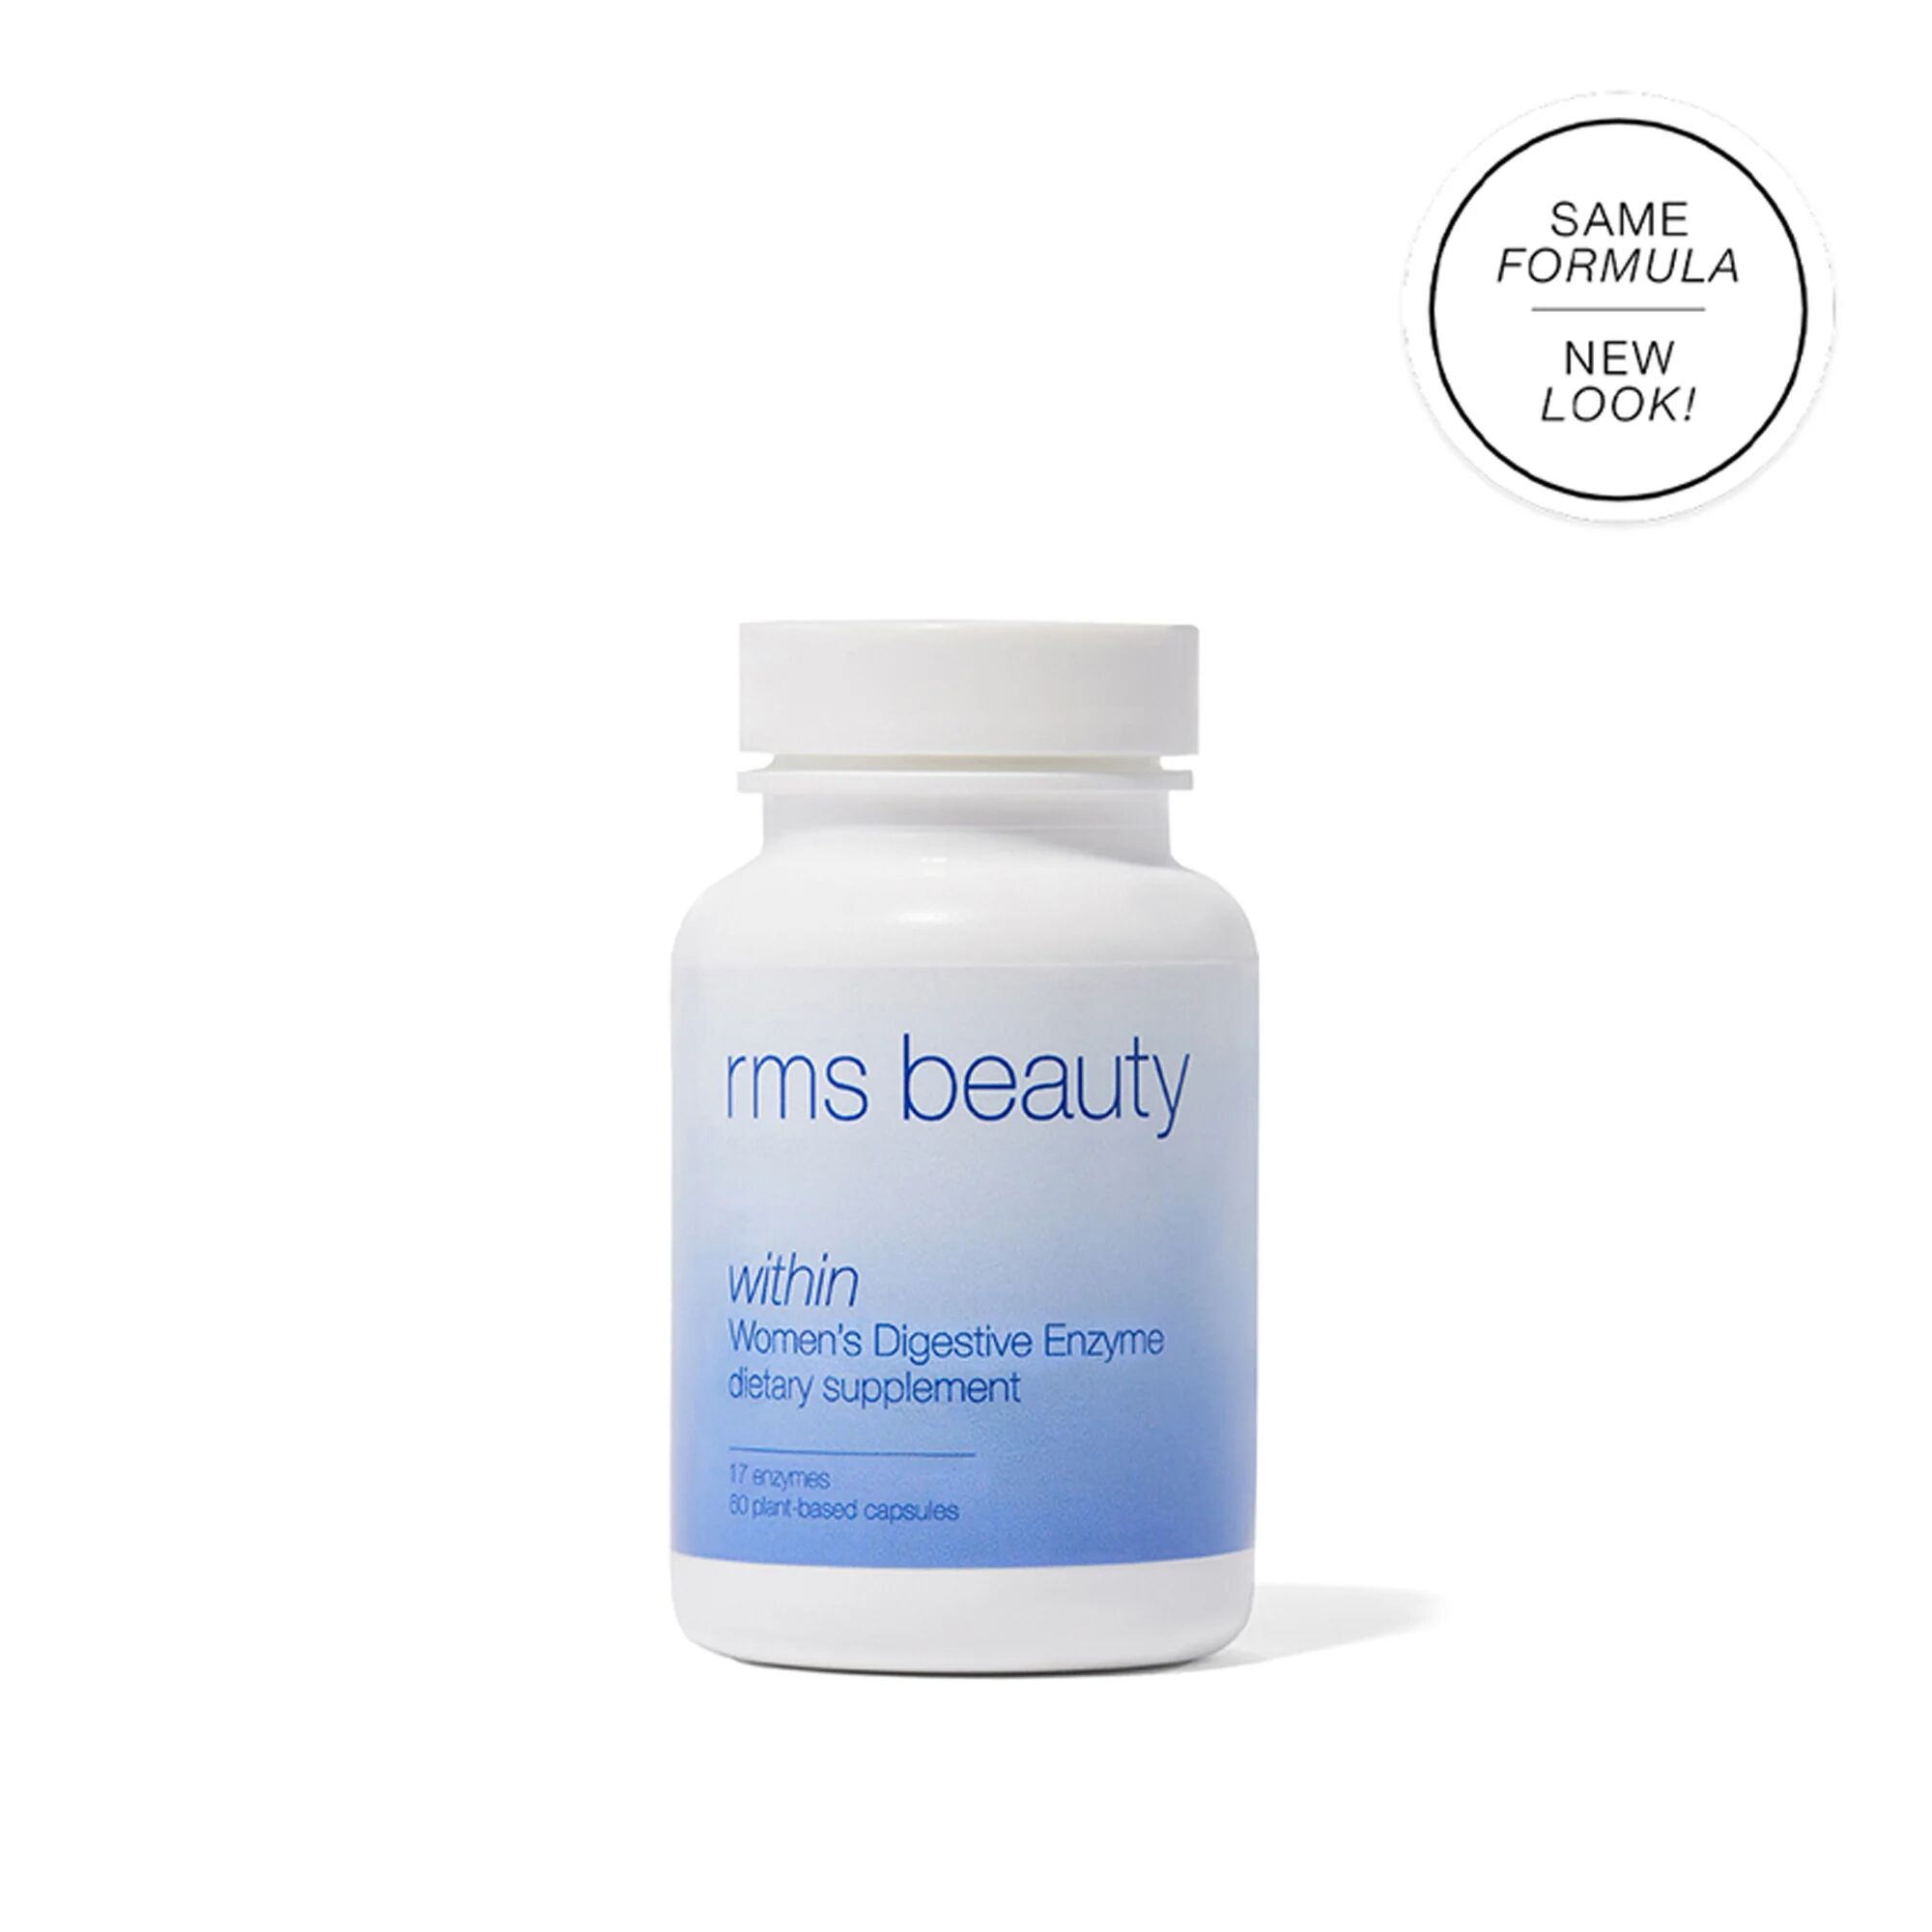 RMS Beauty Within Women's Digestive Enzyme Dietary Supplement